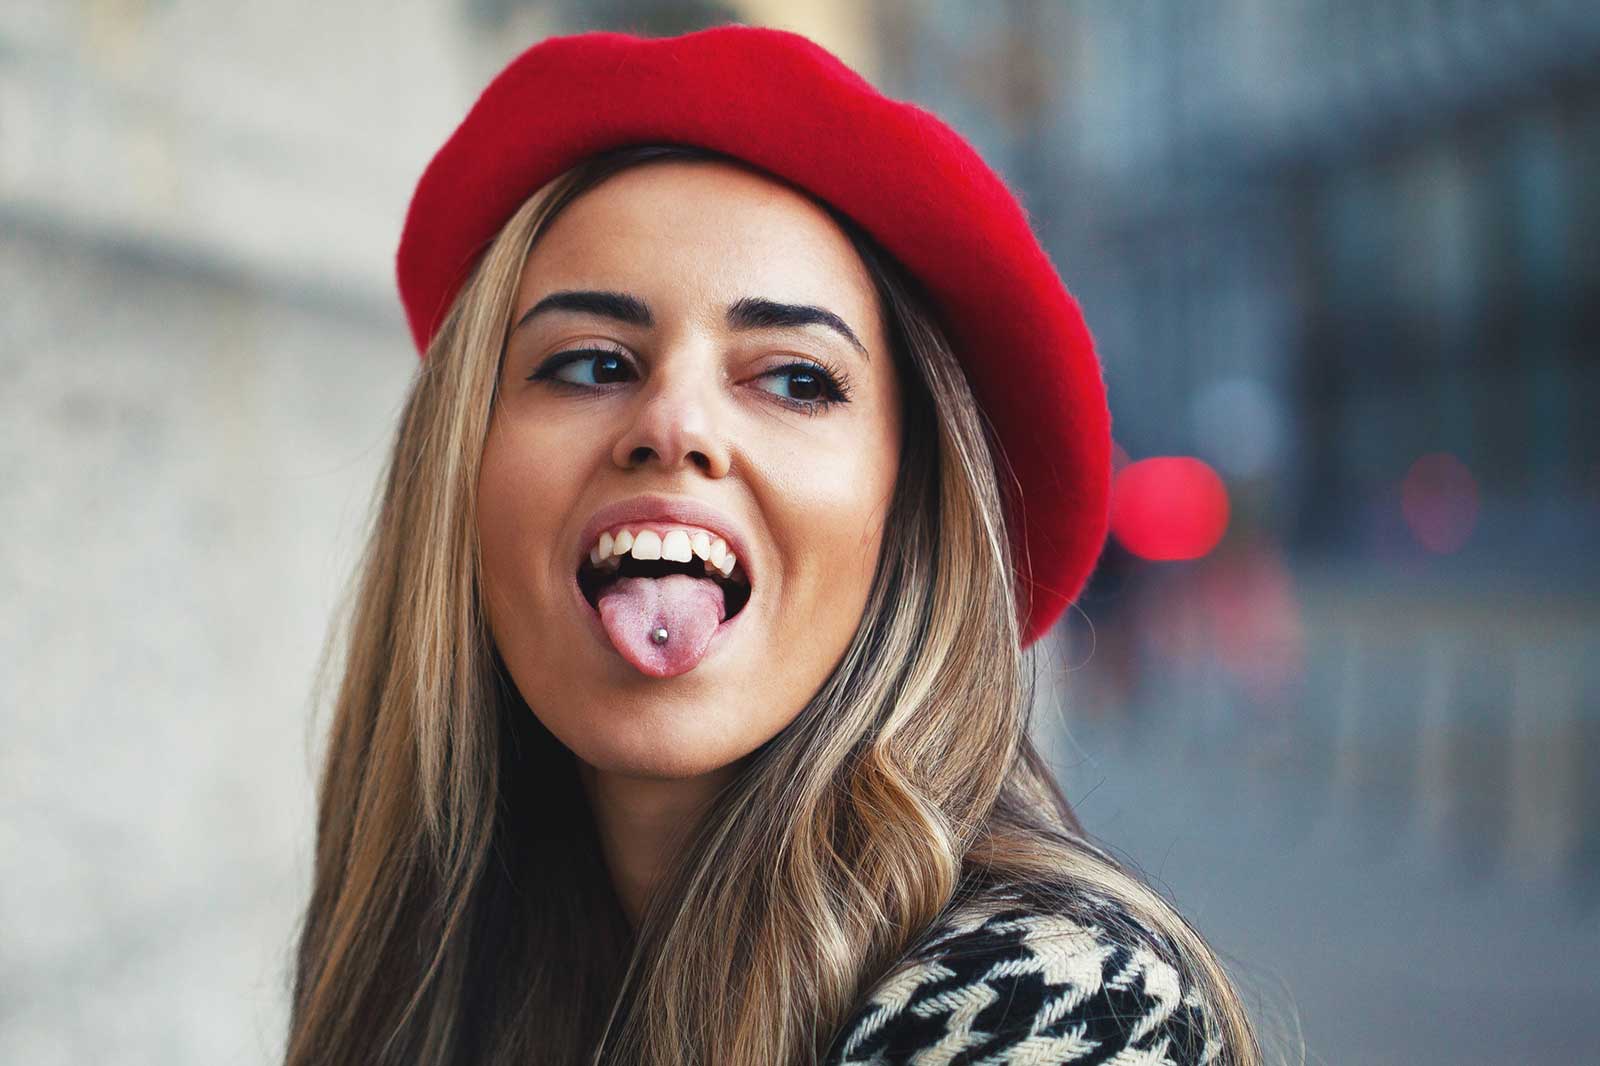 piercings on tongue - Things to Know